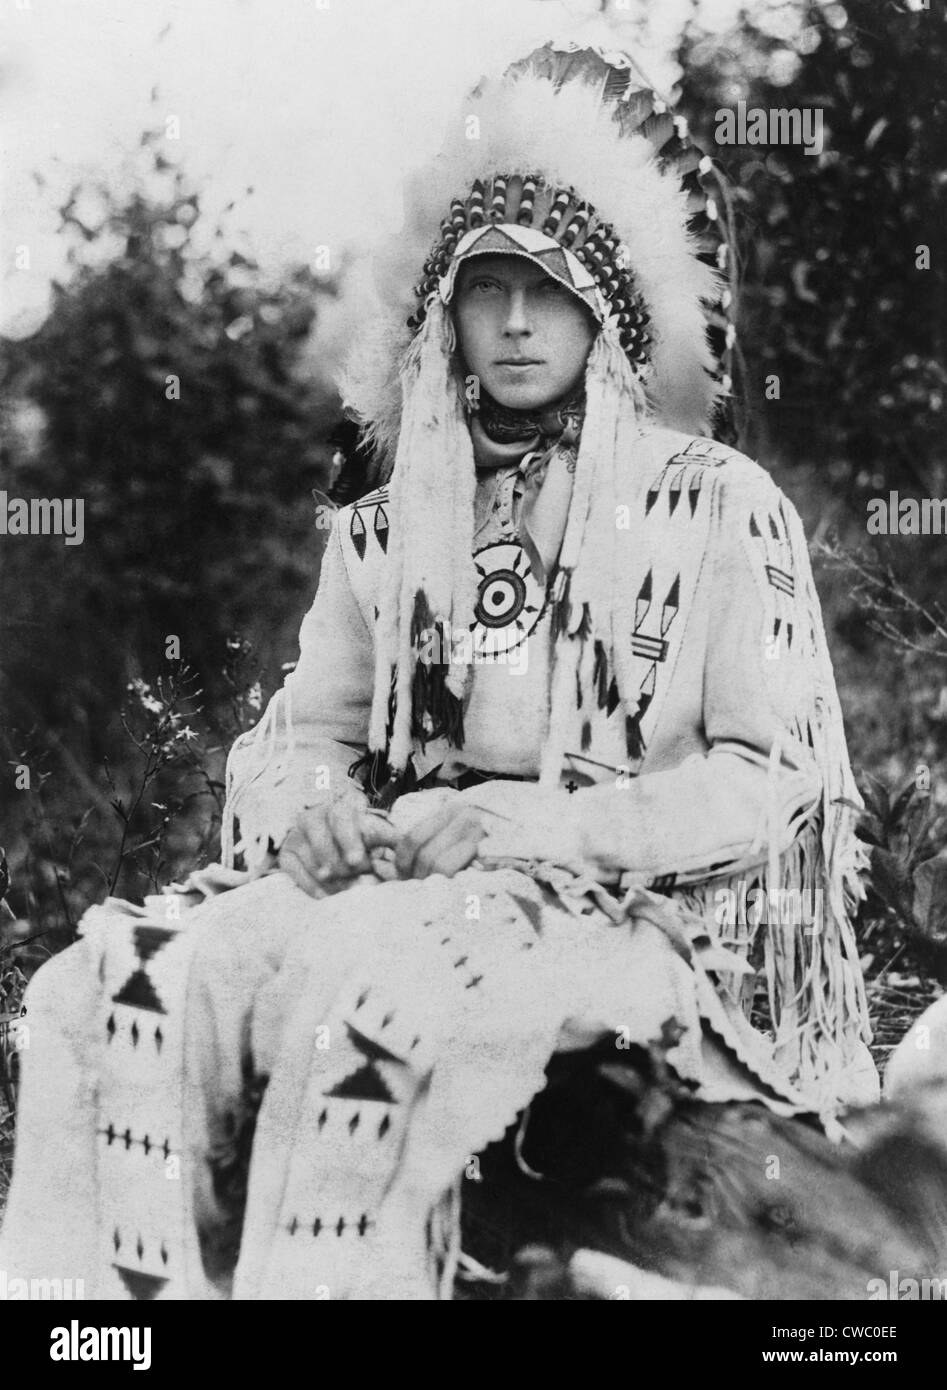 Britain's King Edward VIII as Prince of Wales, wearing the headdress of a Native American chief during a visit to the United Stock Photo